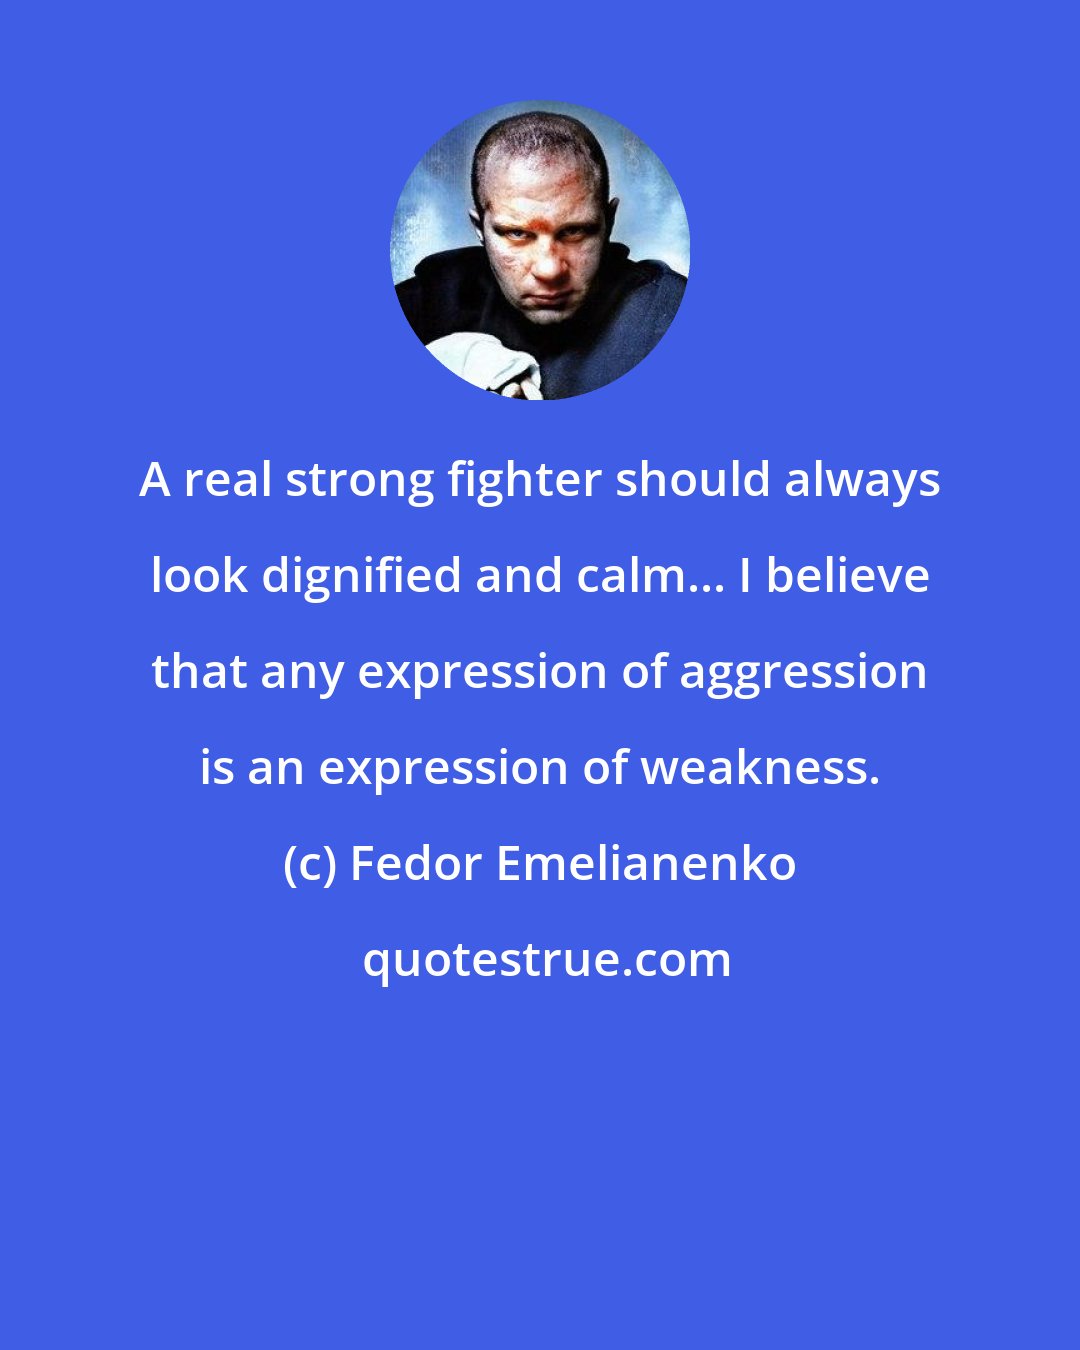 Fedor Emelianenko: A real strong fighter should always look dignified and calm... I believe that any expression of aggression is an expression of weakness.